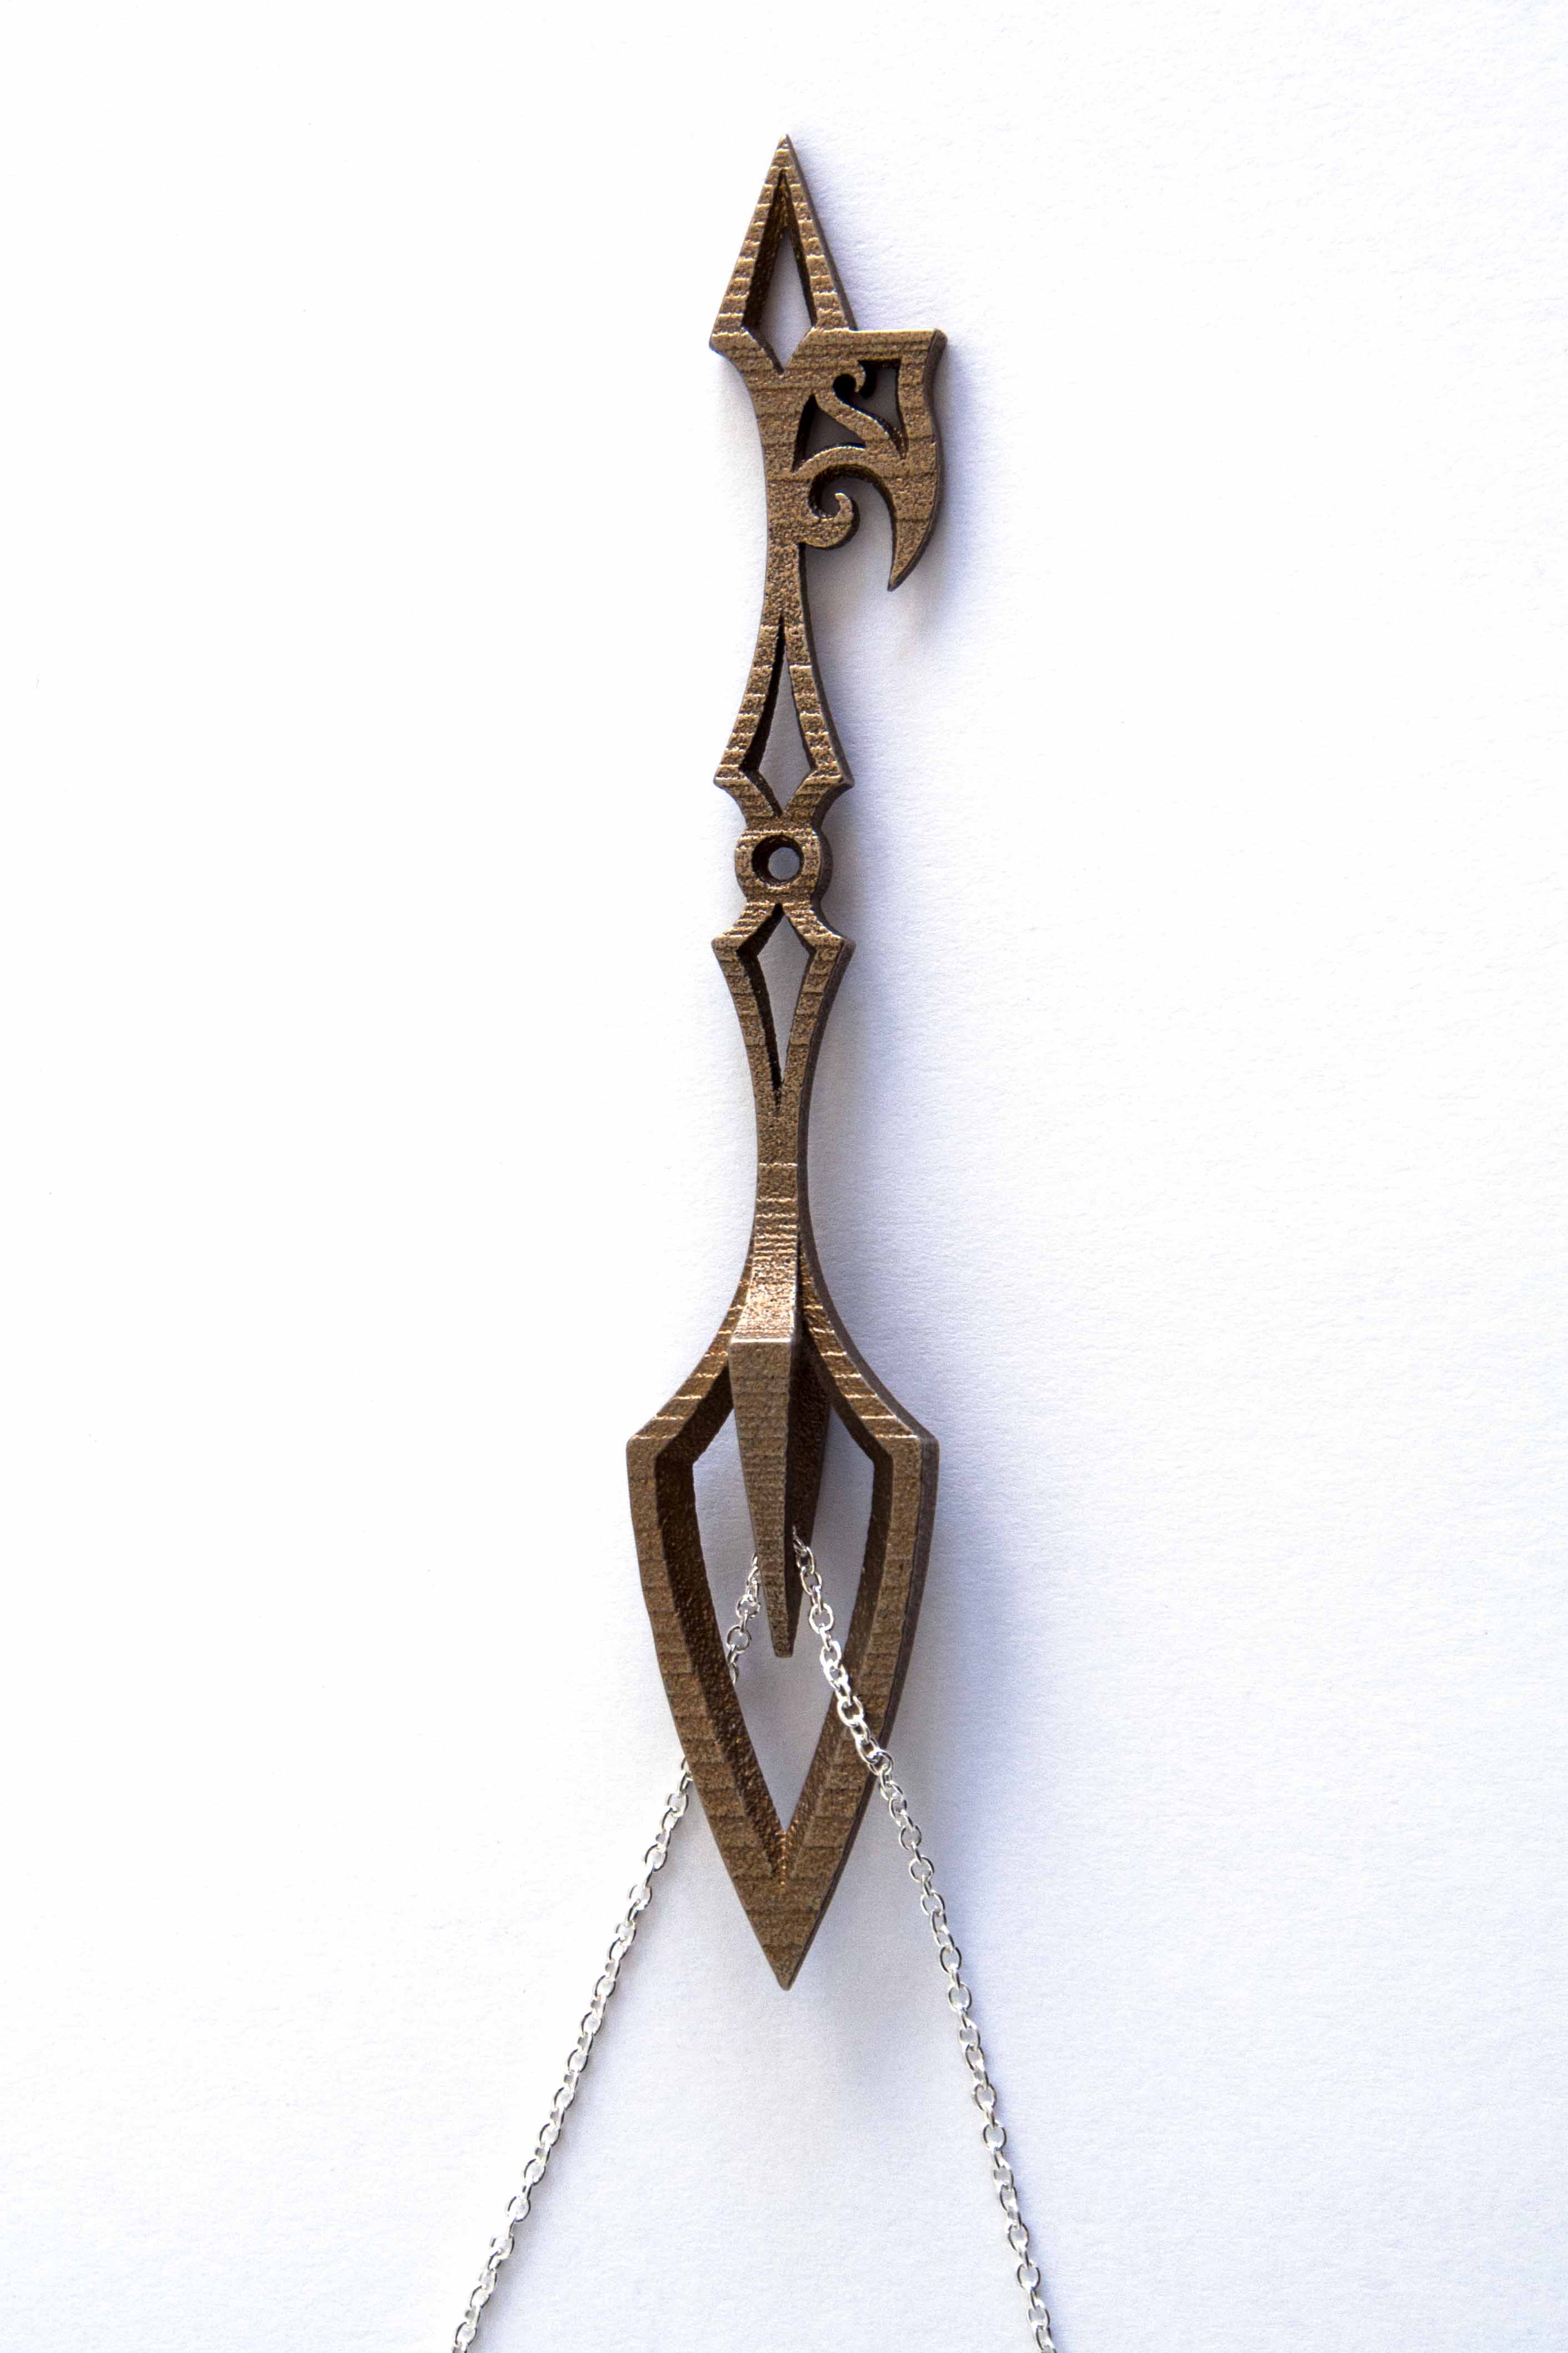 A bronze-colored skeleton key defined by pointed ends, curved edges, and negative space.